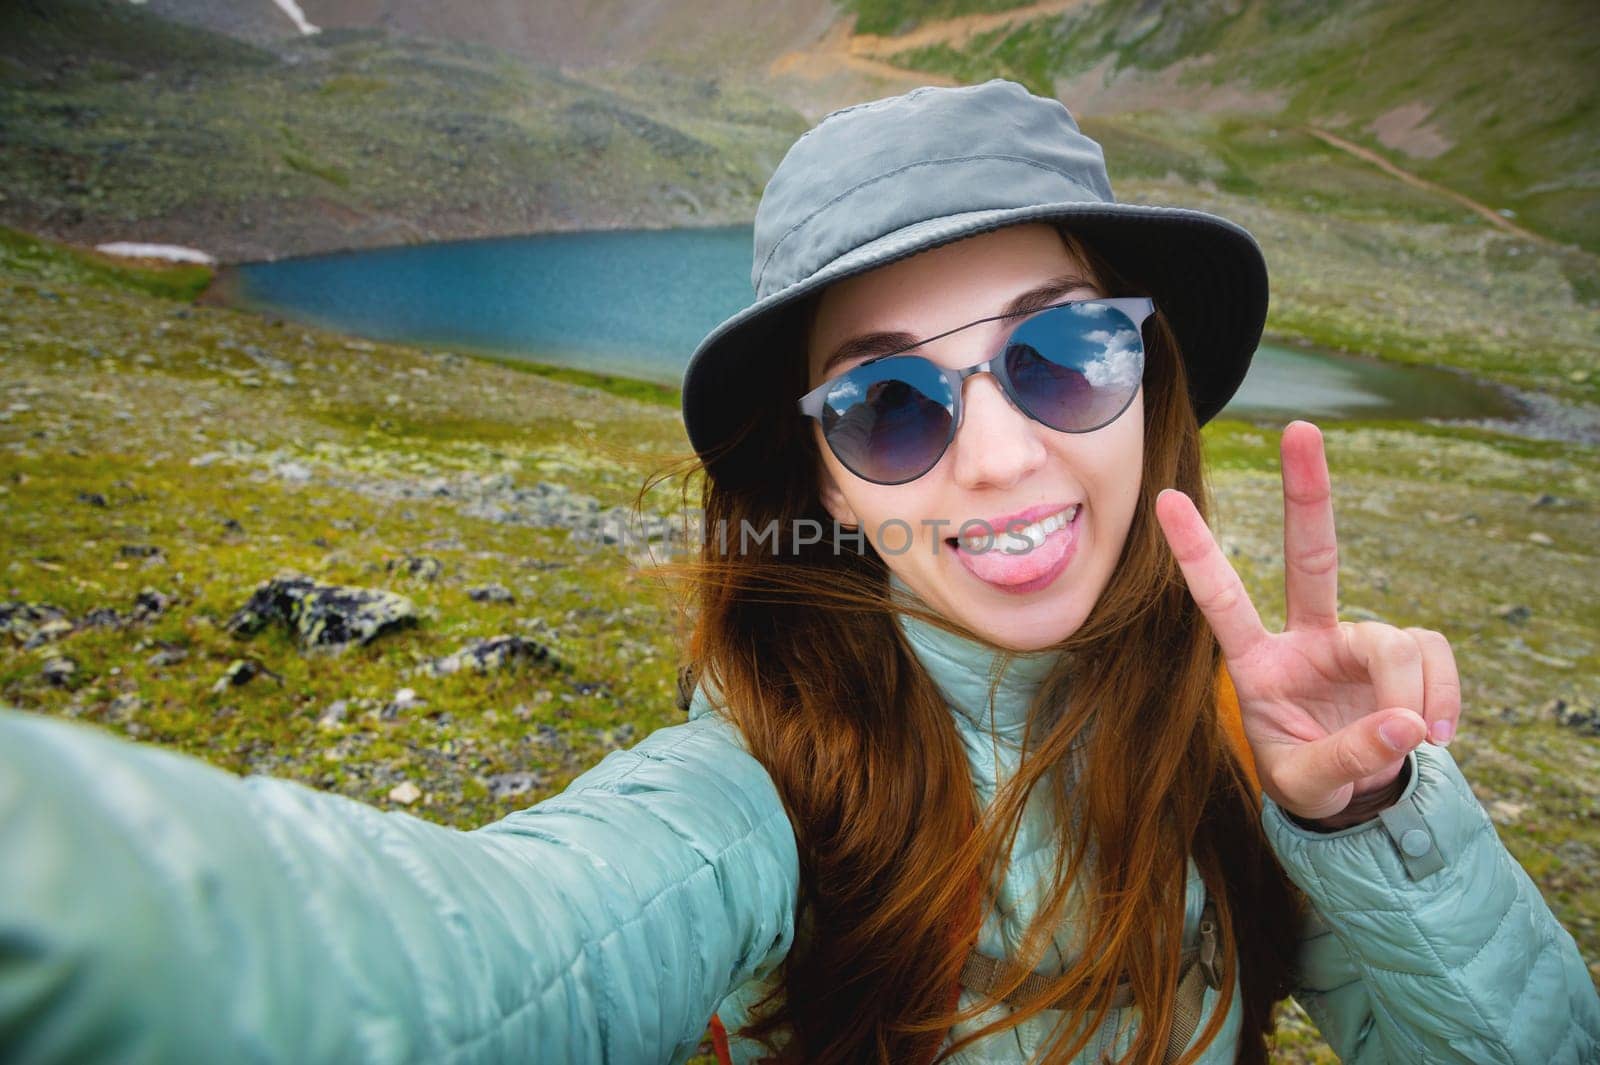 Selfie portrait of young attractive woman wearing sunglasses and backpack smiling with lake and mountains in the background, sunny morning by yanik88